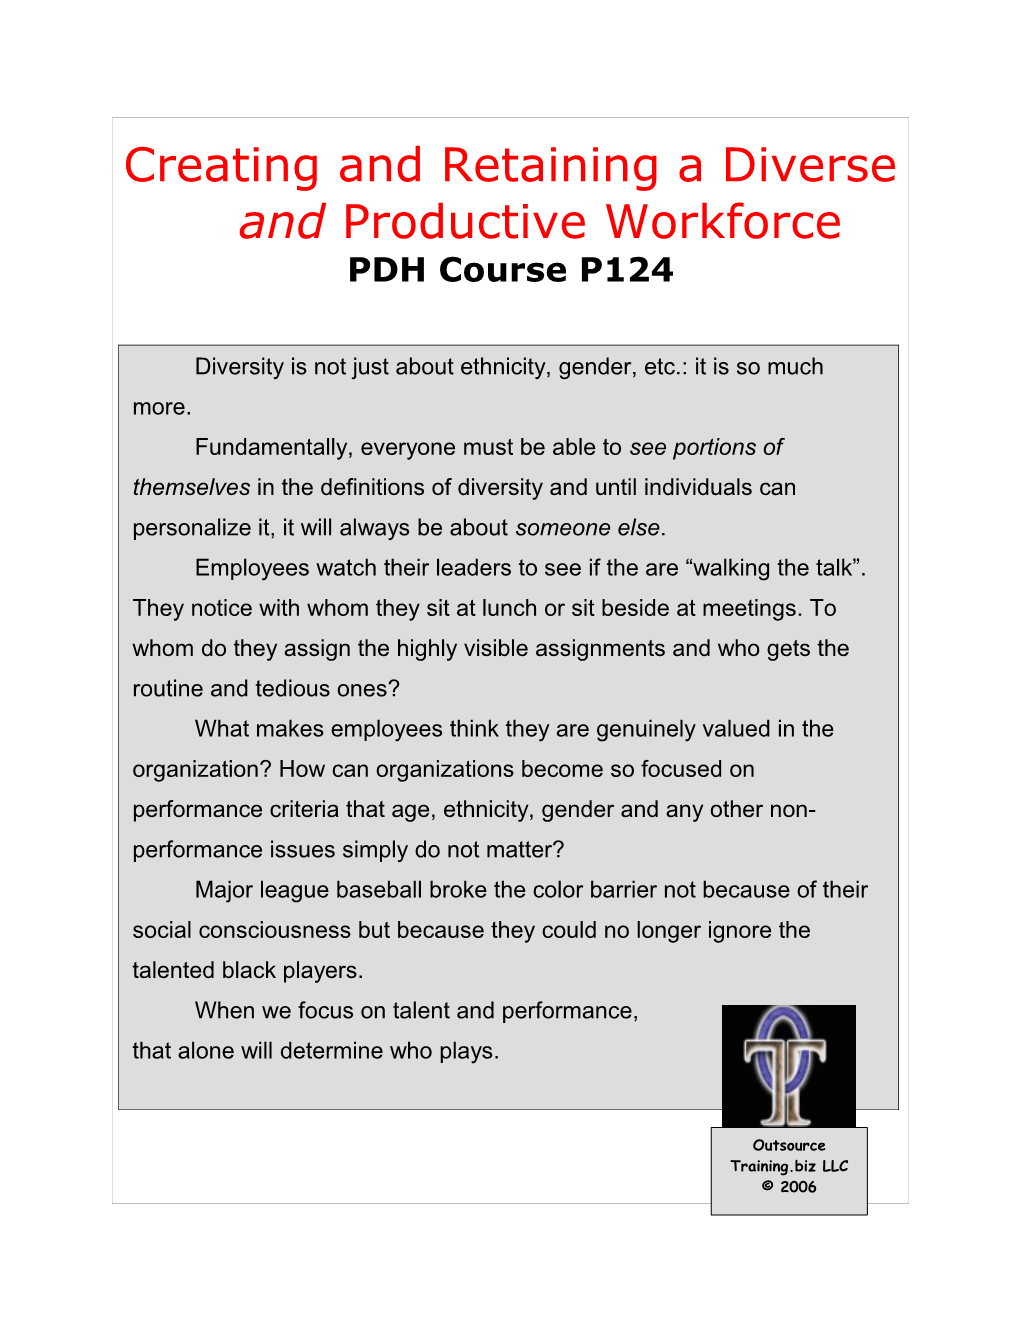 Creating & Retaining a Productive Workforce